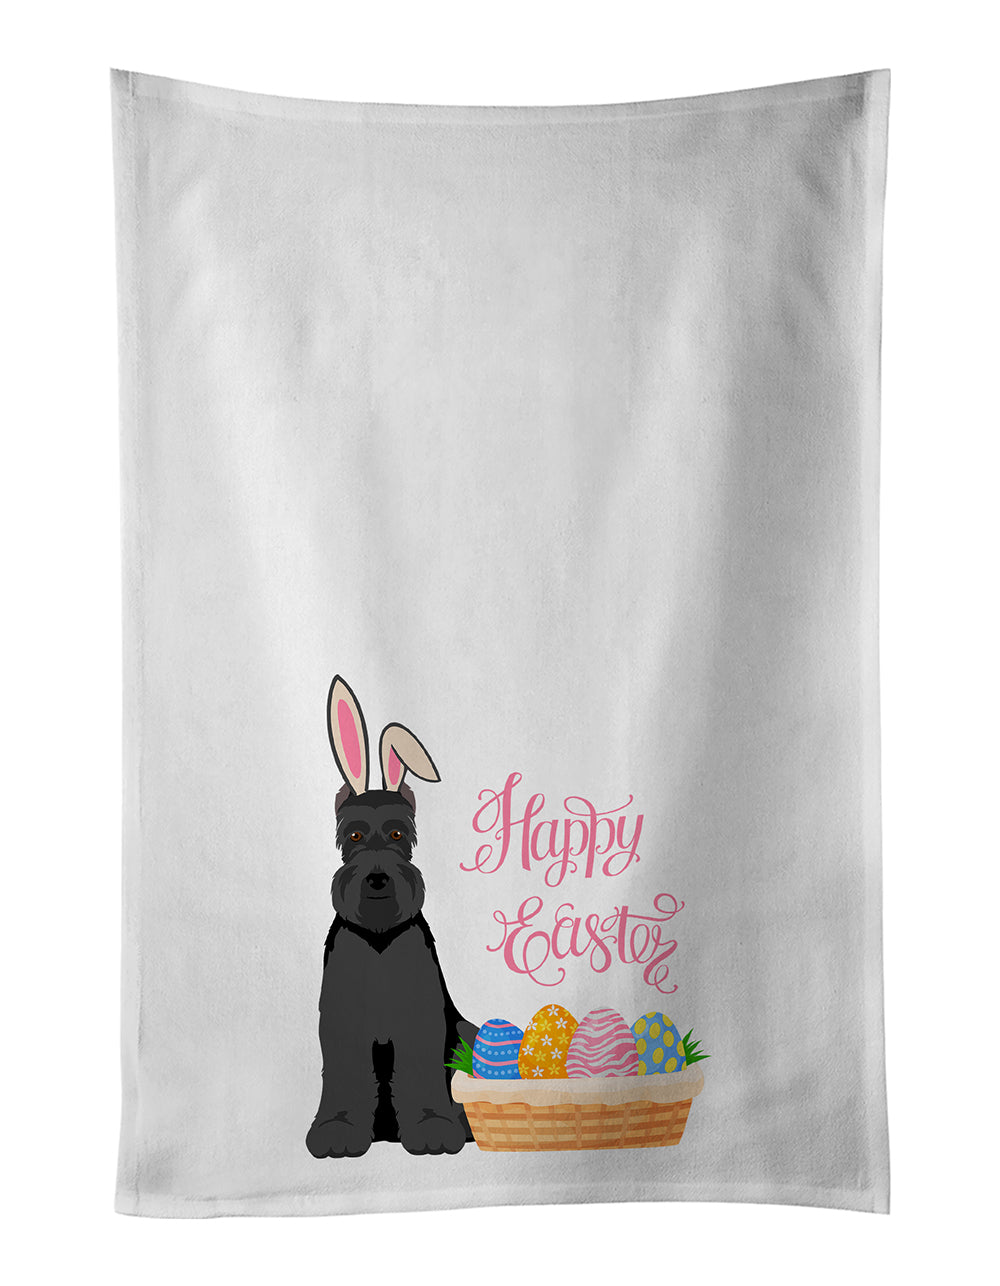 Buy this Black Schnauzer Easter White Kitchen Towel Set of 2 Dish Towels